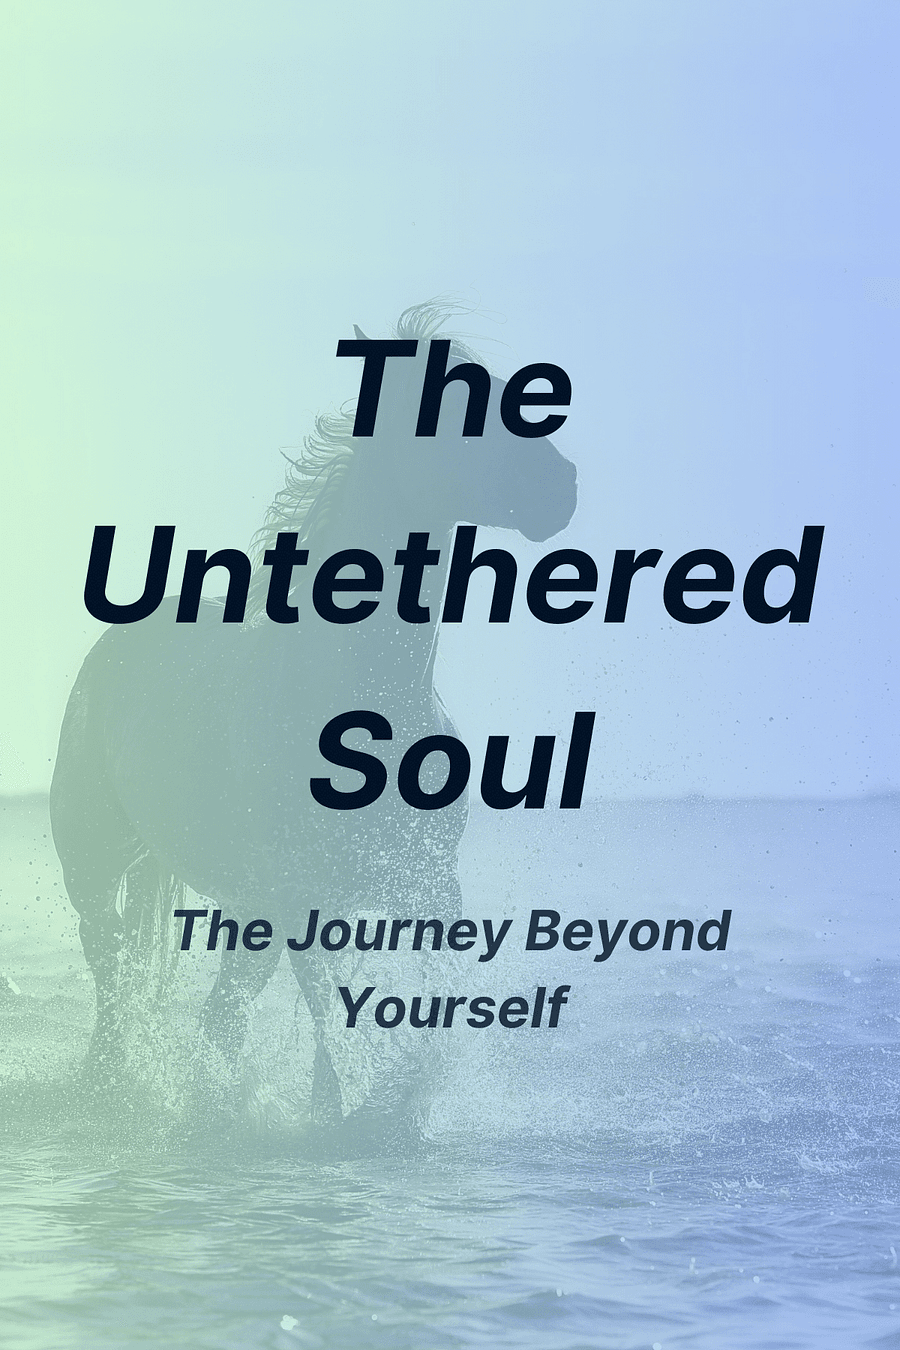 The Untethered Soul by Michael A. Singer - Book Summary